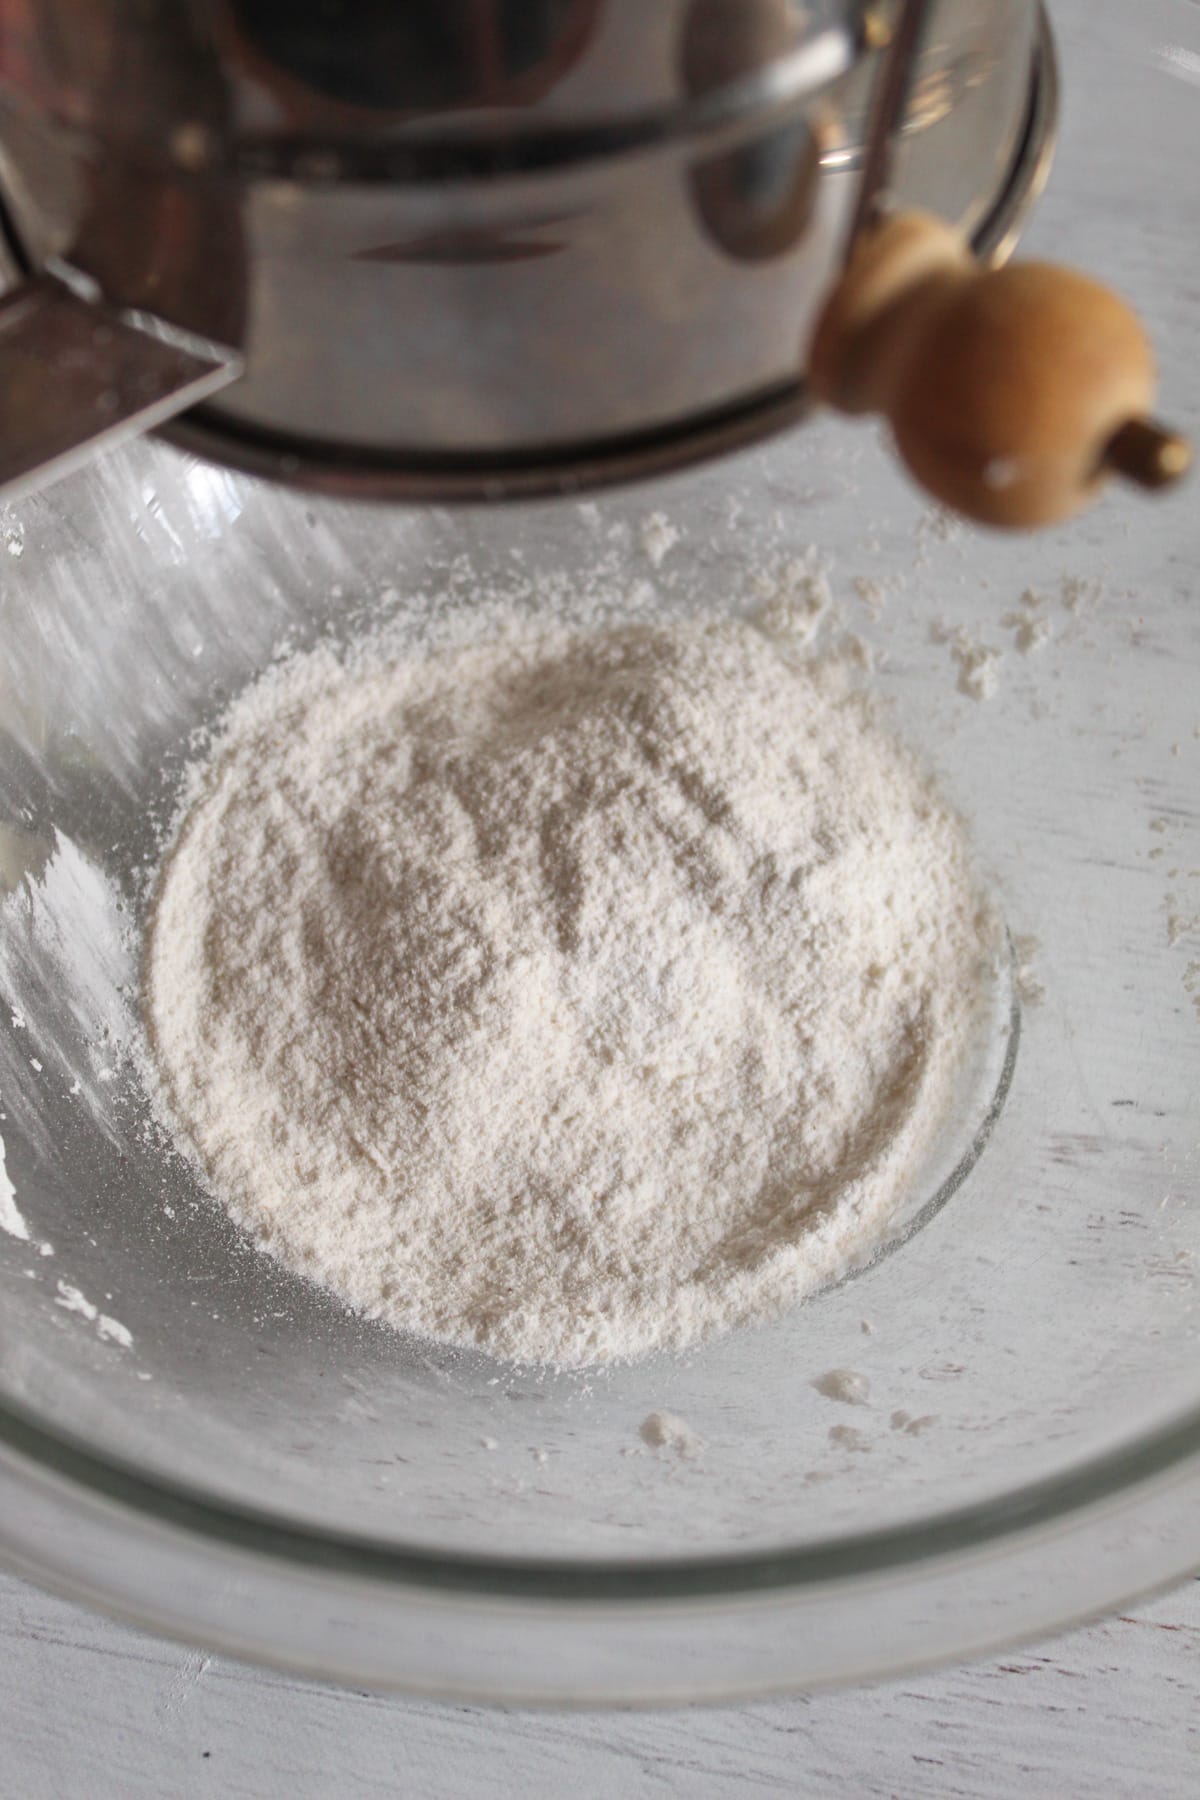 sifting gluten free flours in a glass bowl.